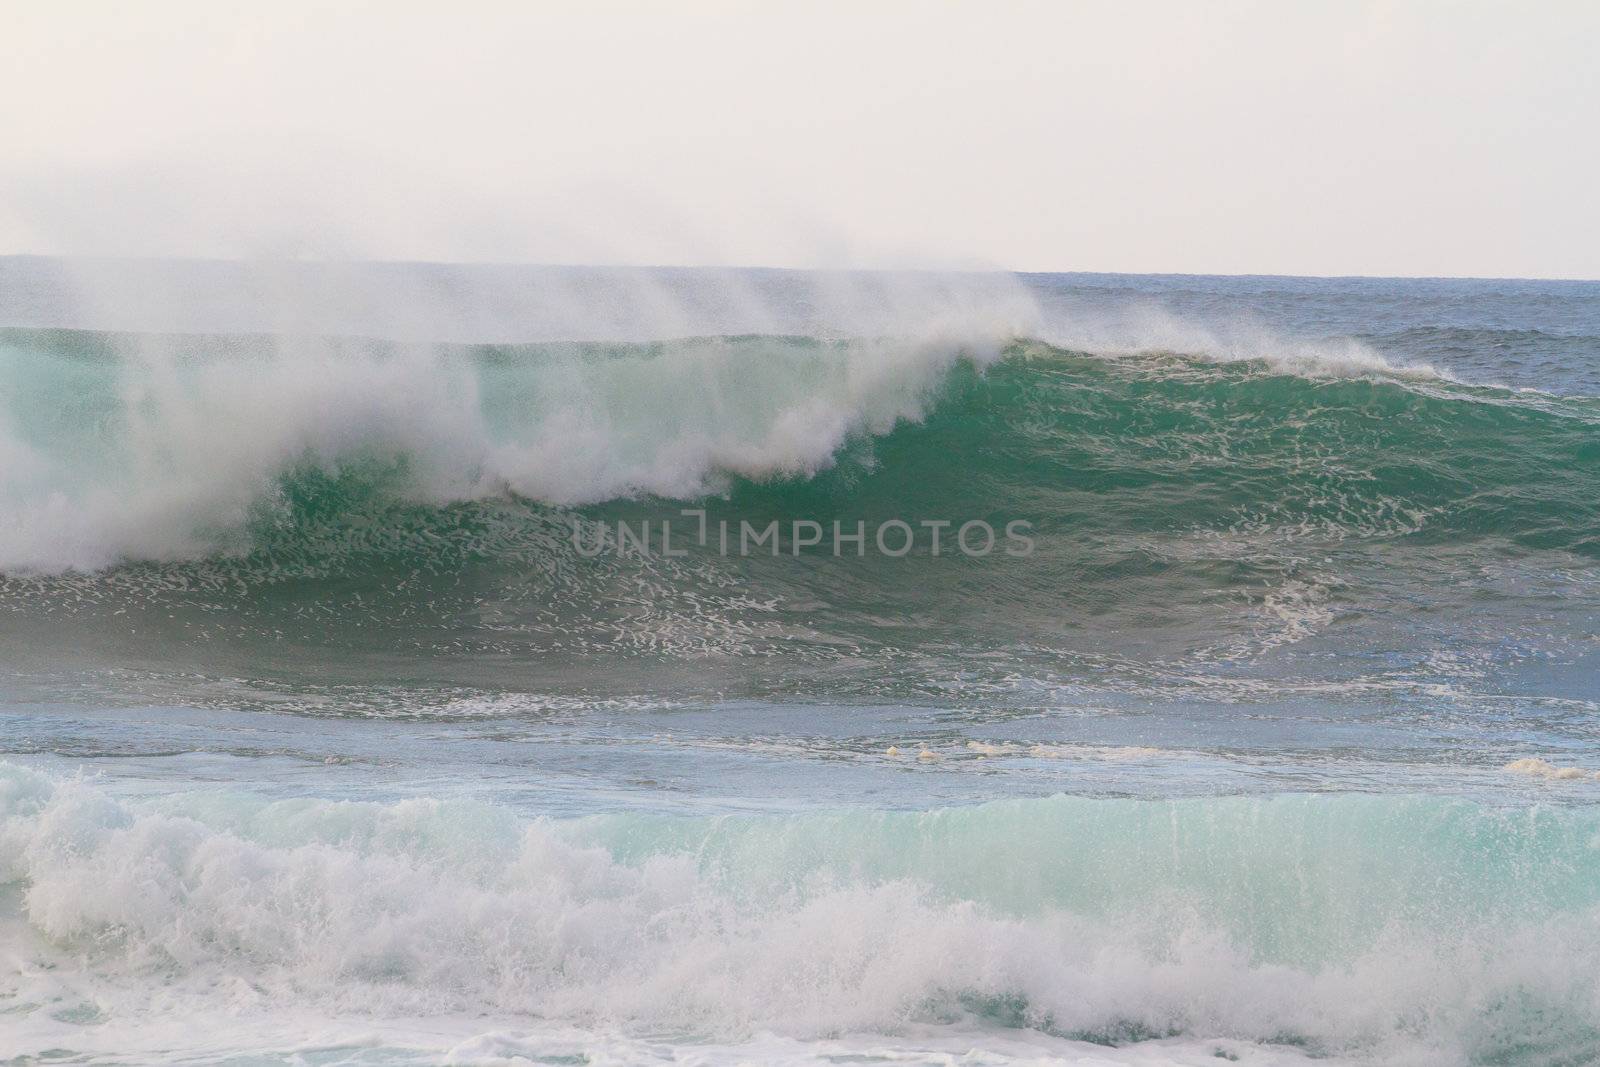 A giant wave breaking during a storm on the north shore of Oahu in Hawaii. These incredible waves have tons of white water and froth with hollow barrels and a dangerous rip current.